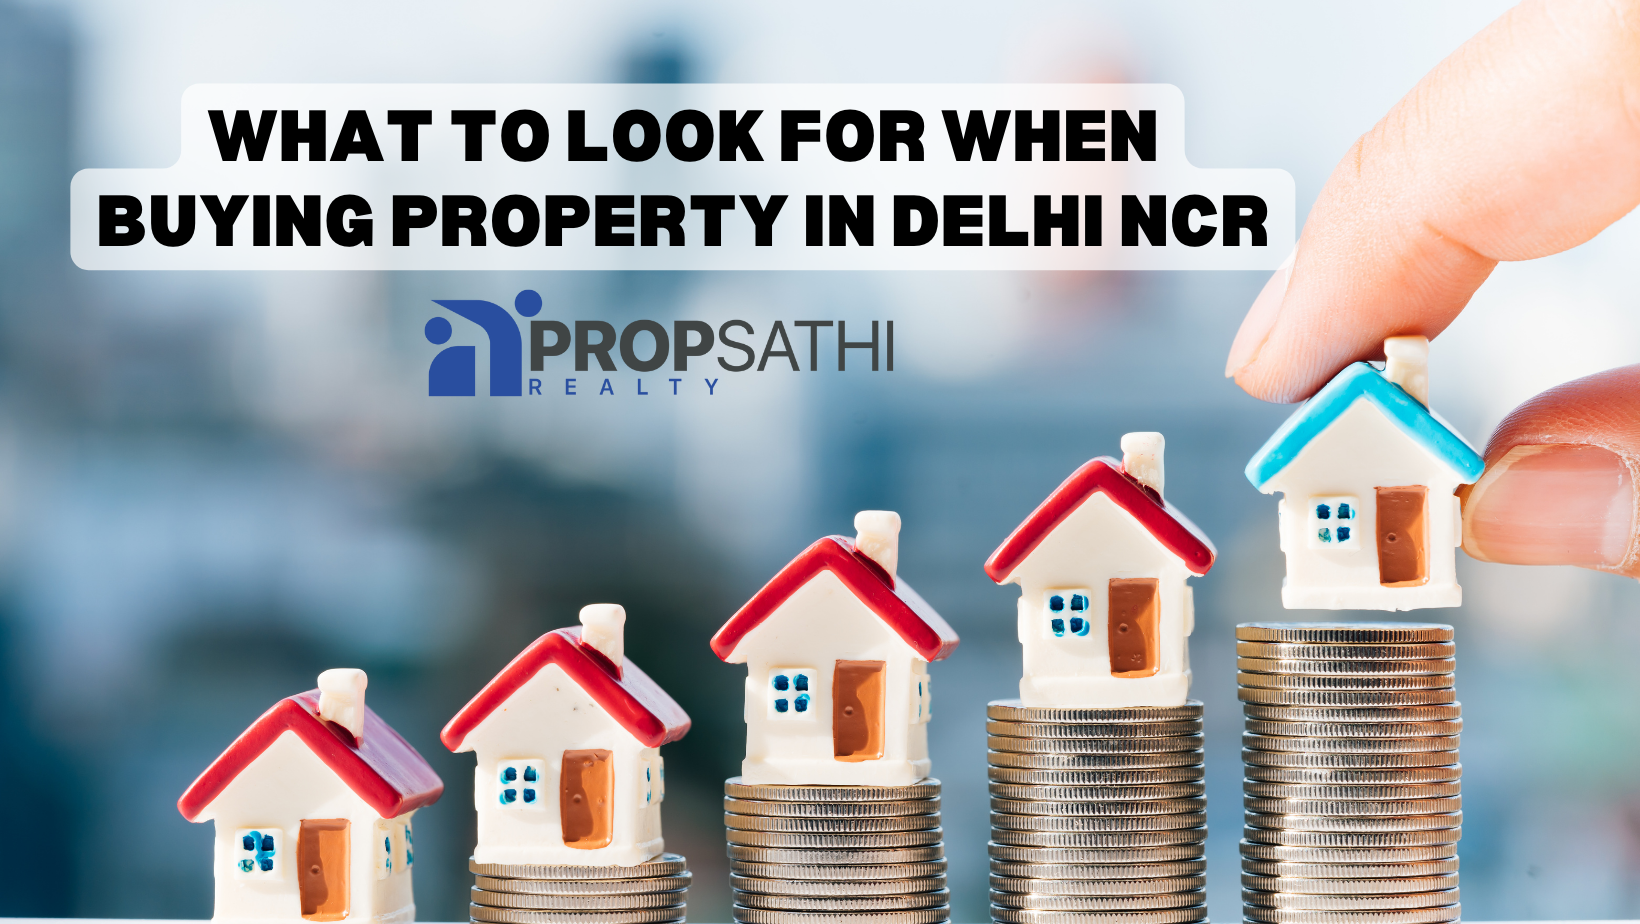 What to Look for When Buying Property in Delhi NCR? Propsathi Realty